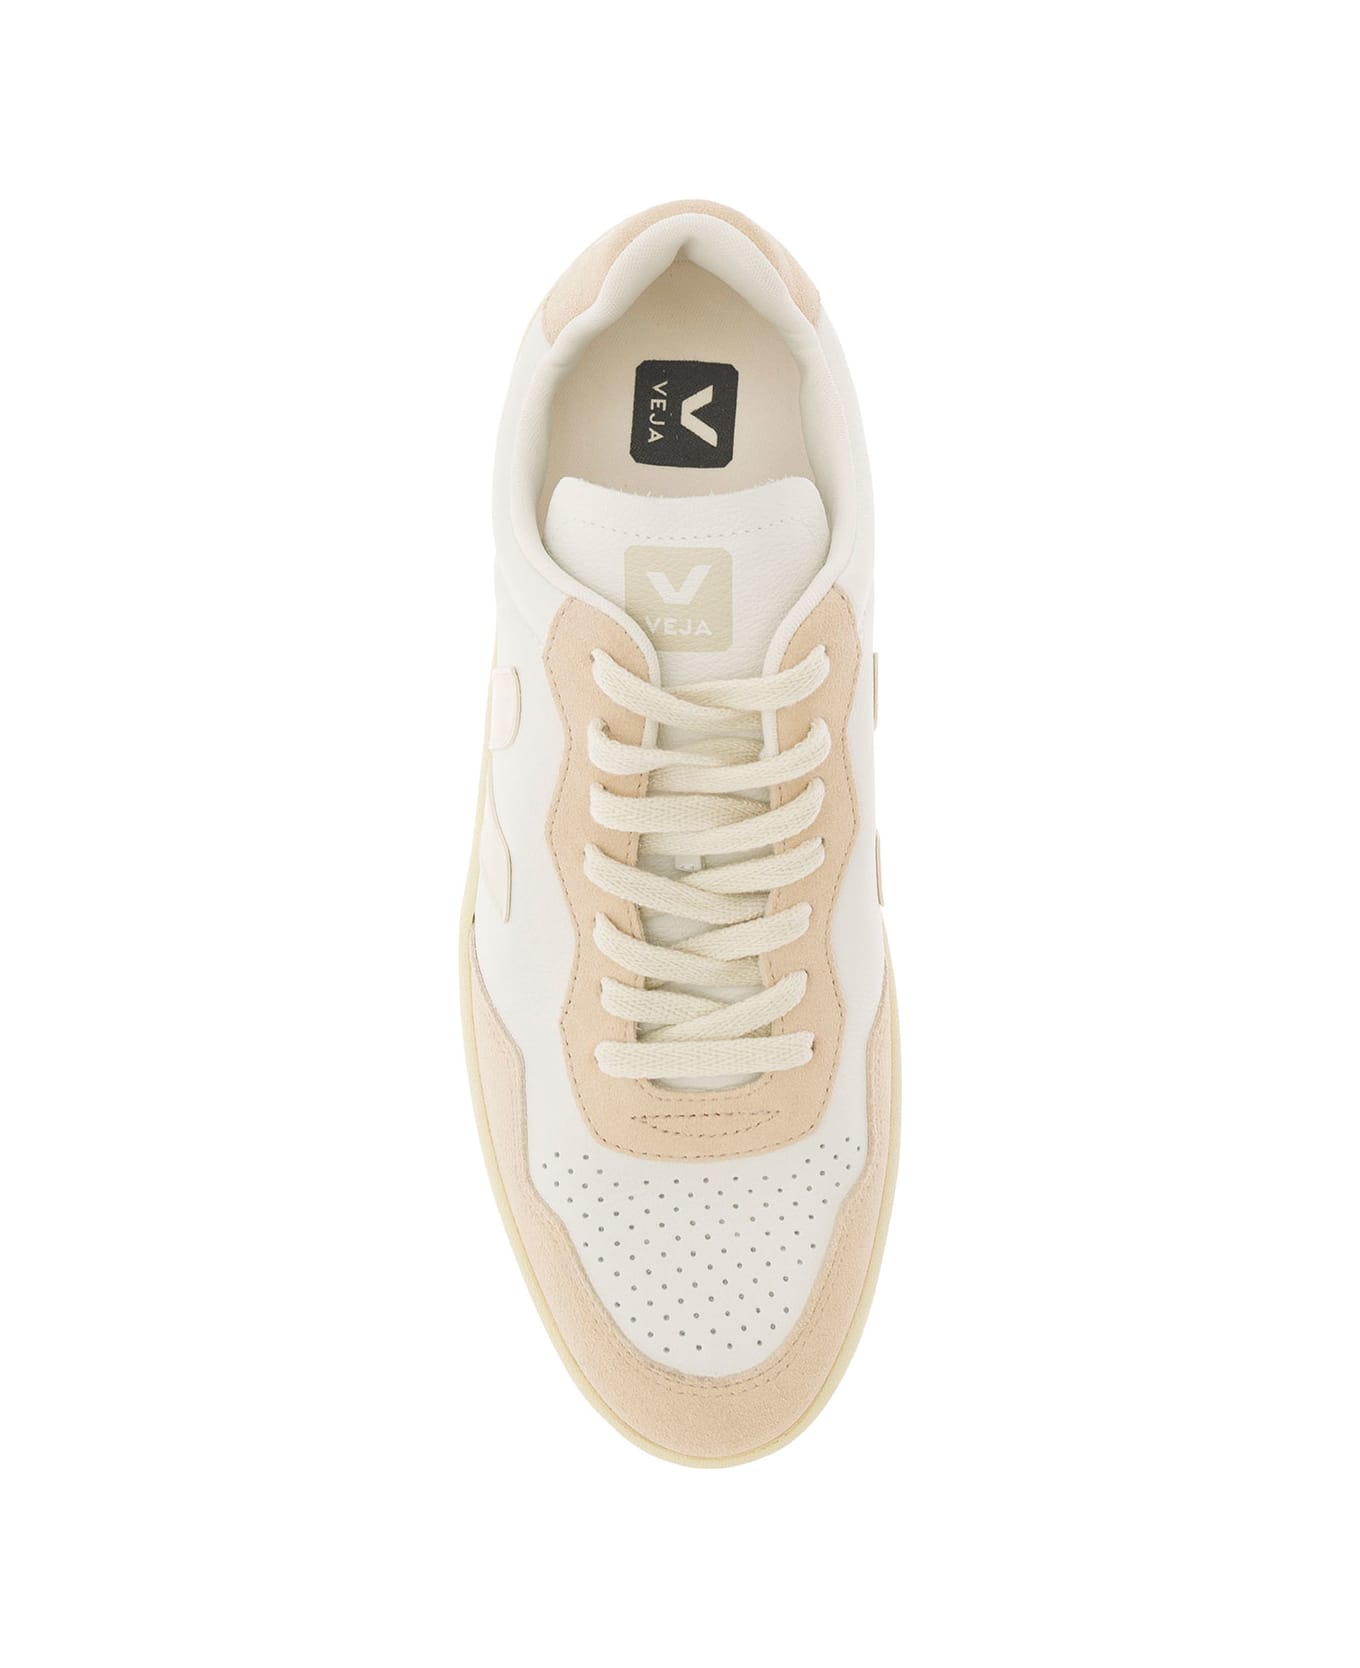 Veja White And Beige Sneakers With Logo Details In Leather Man - Beige